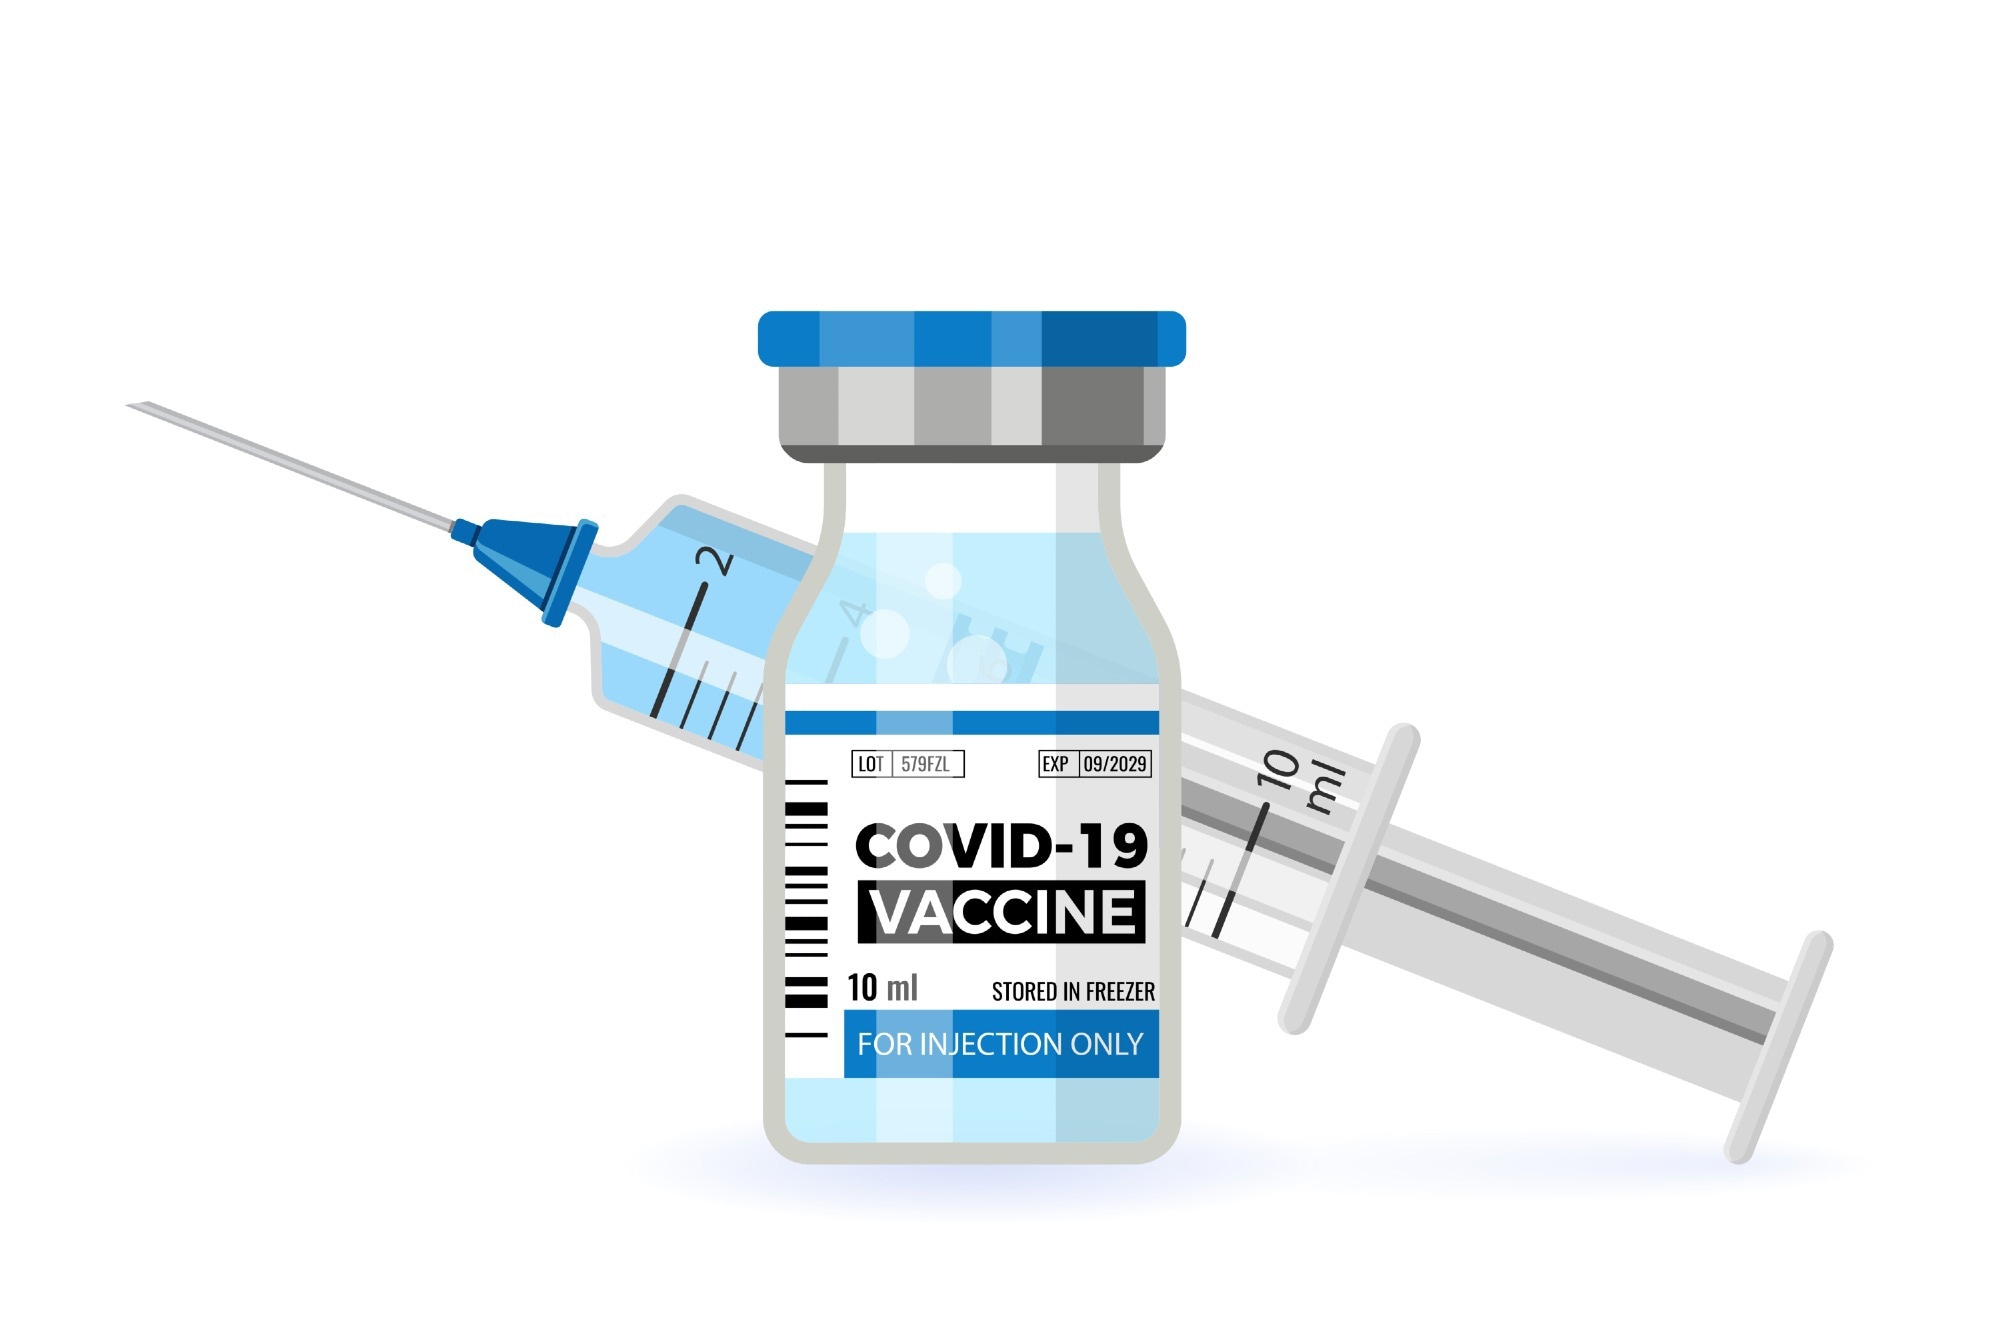 Study: Adverse events following first and second dose COVID-19 vaccination in England, October 2020 to September 2021: a national vaccine surveillance platform self-controlled case series study. Image Credit: Telnov Oleksii/Shutterstock